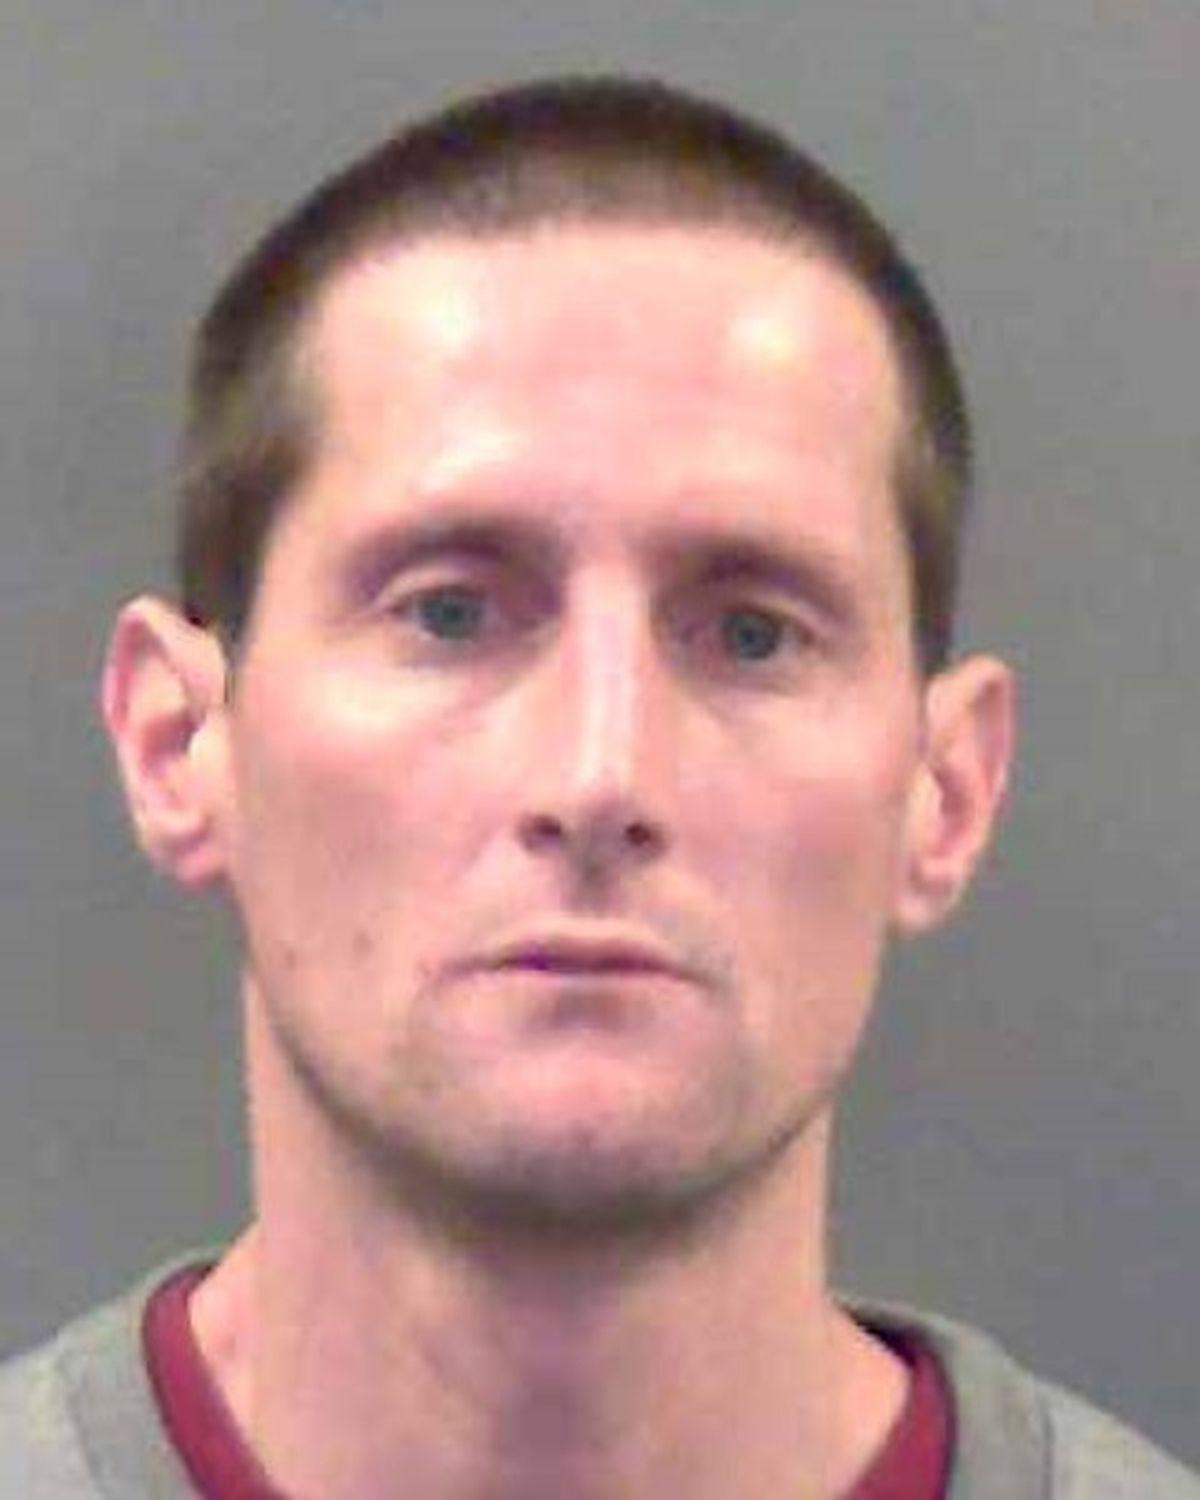 Cory Gudgeon, jailed for 42 months